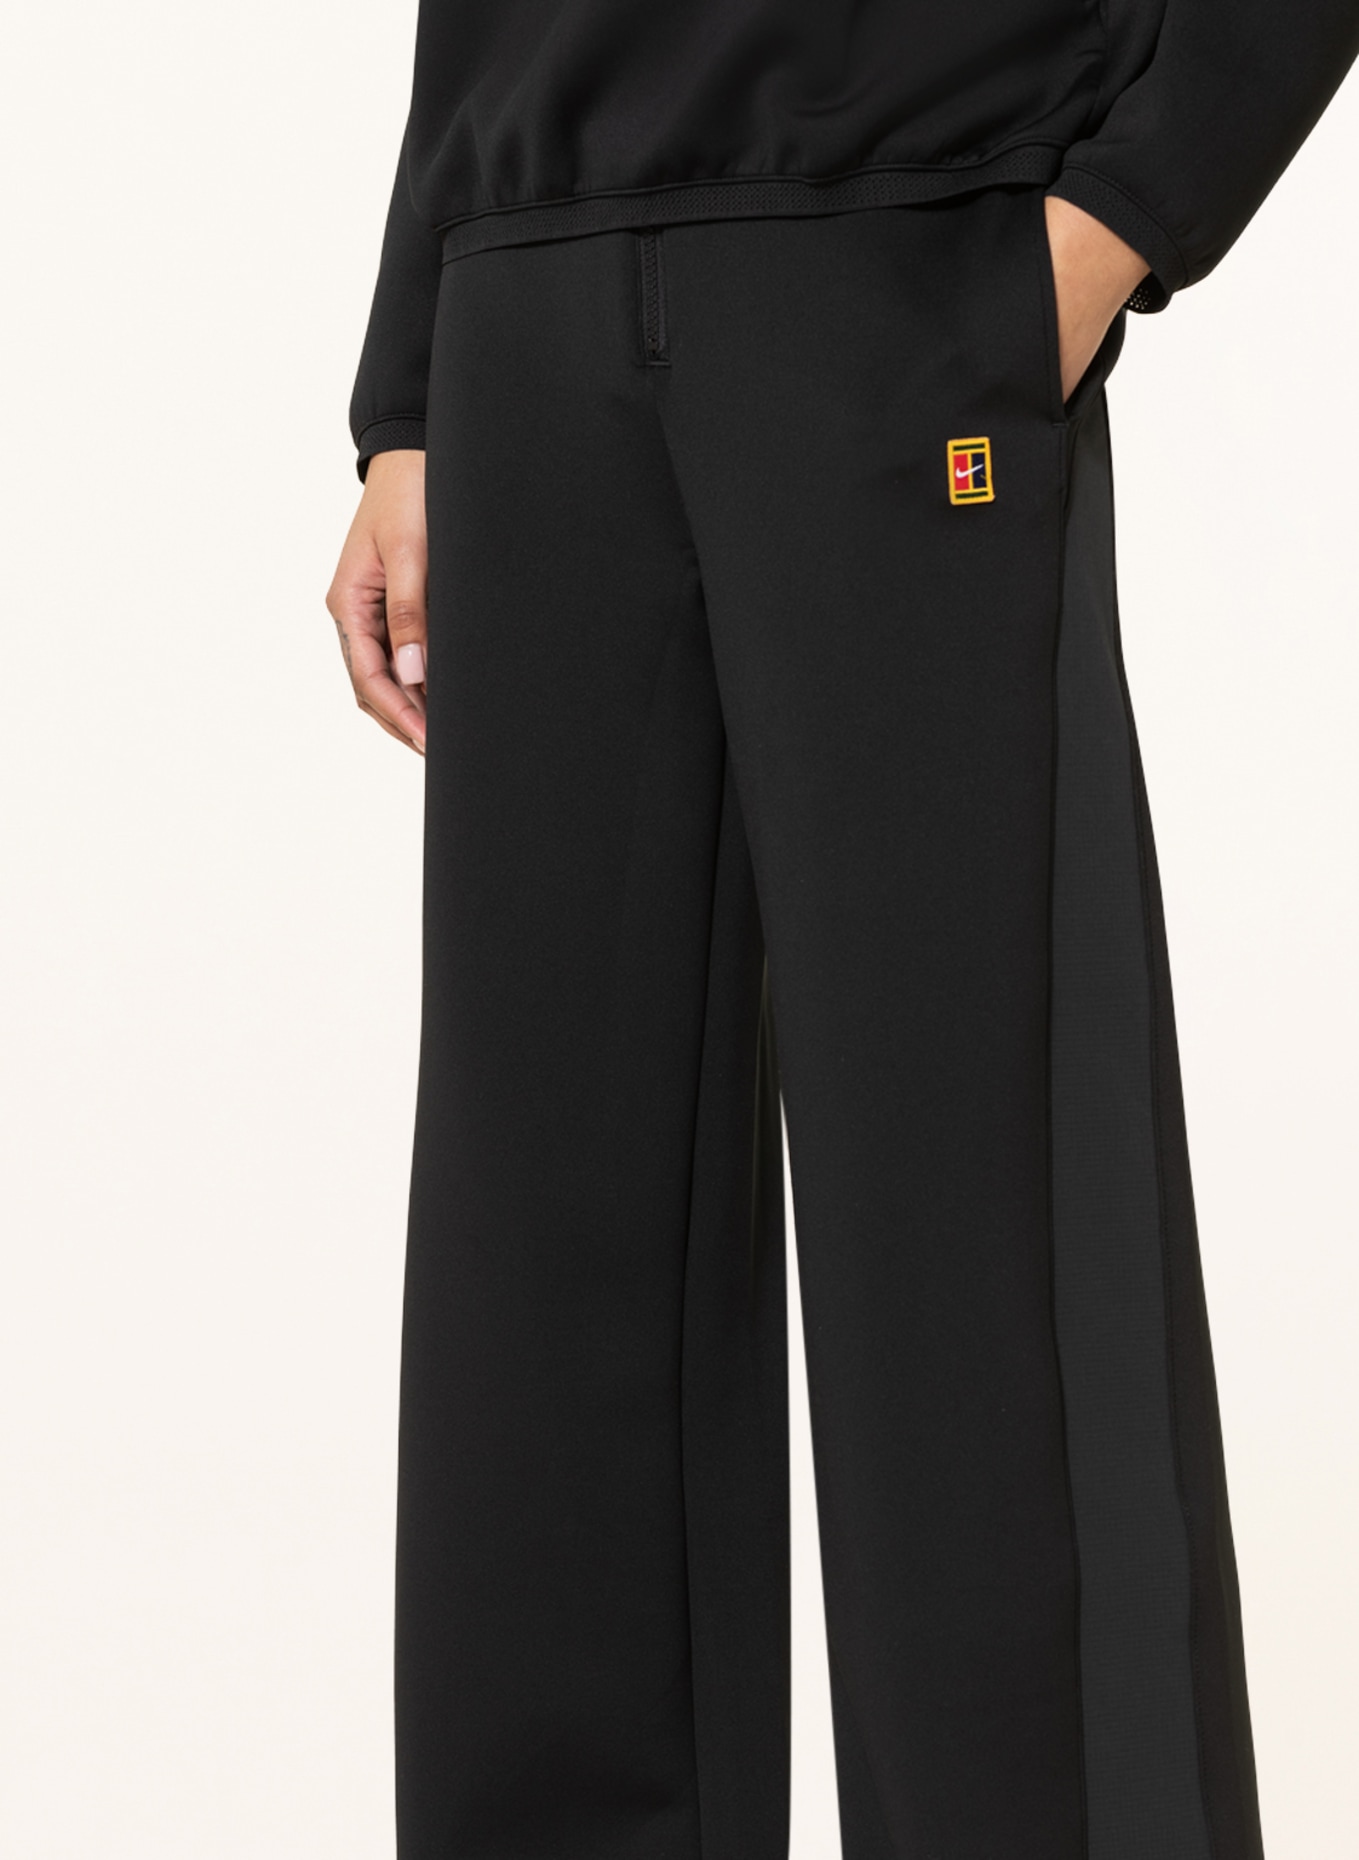 Nike Tennis trousers COURTDRI-FIT HERITAGE with mesh, Color: BLACK (Image 5)